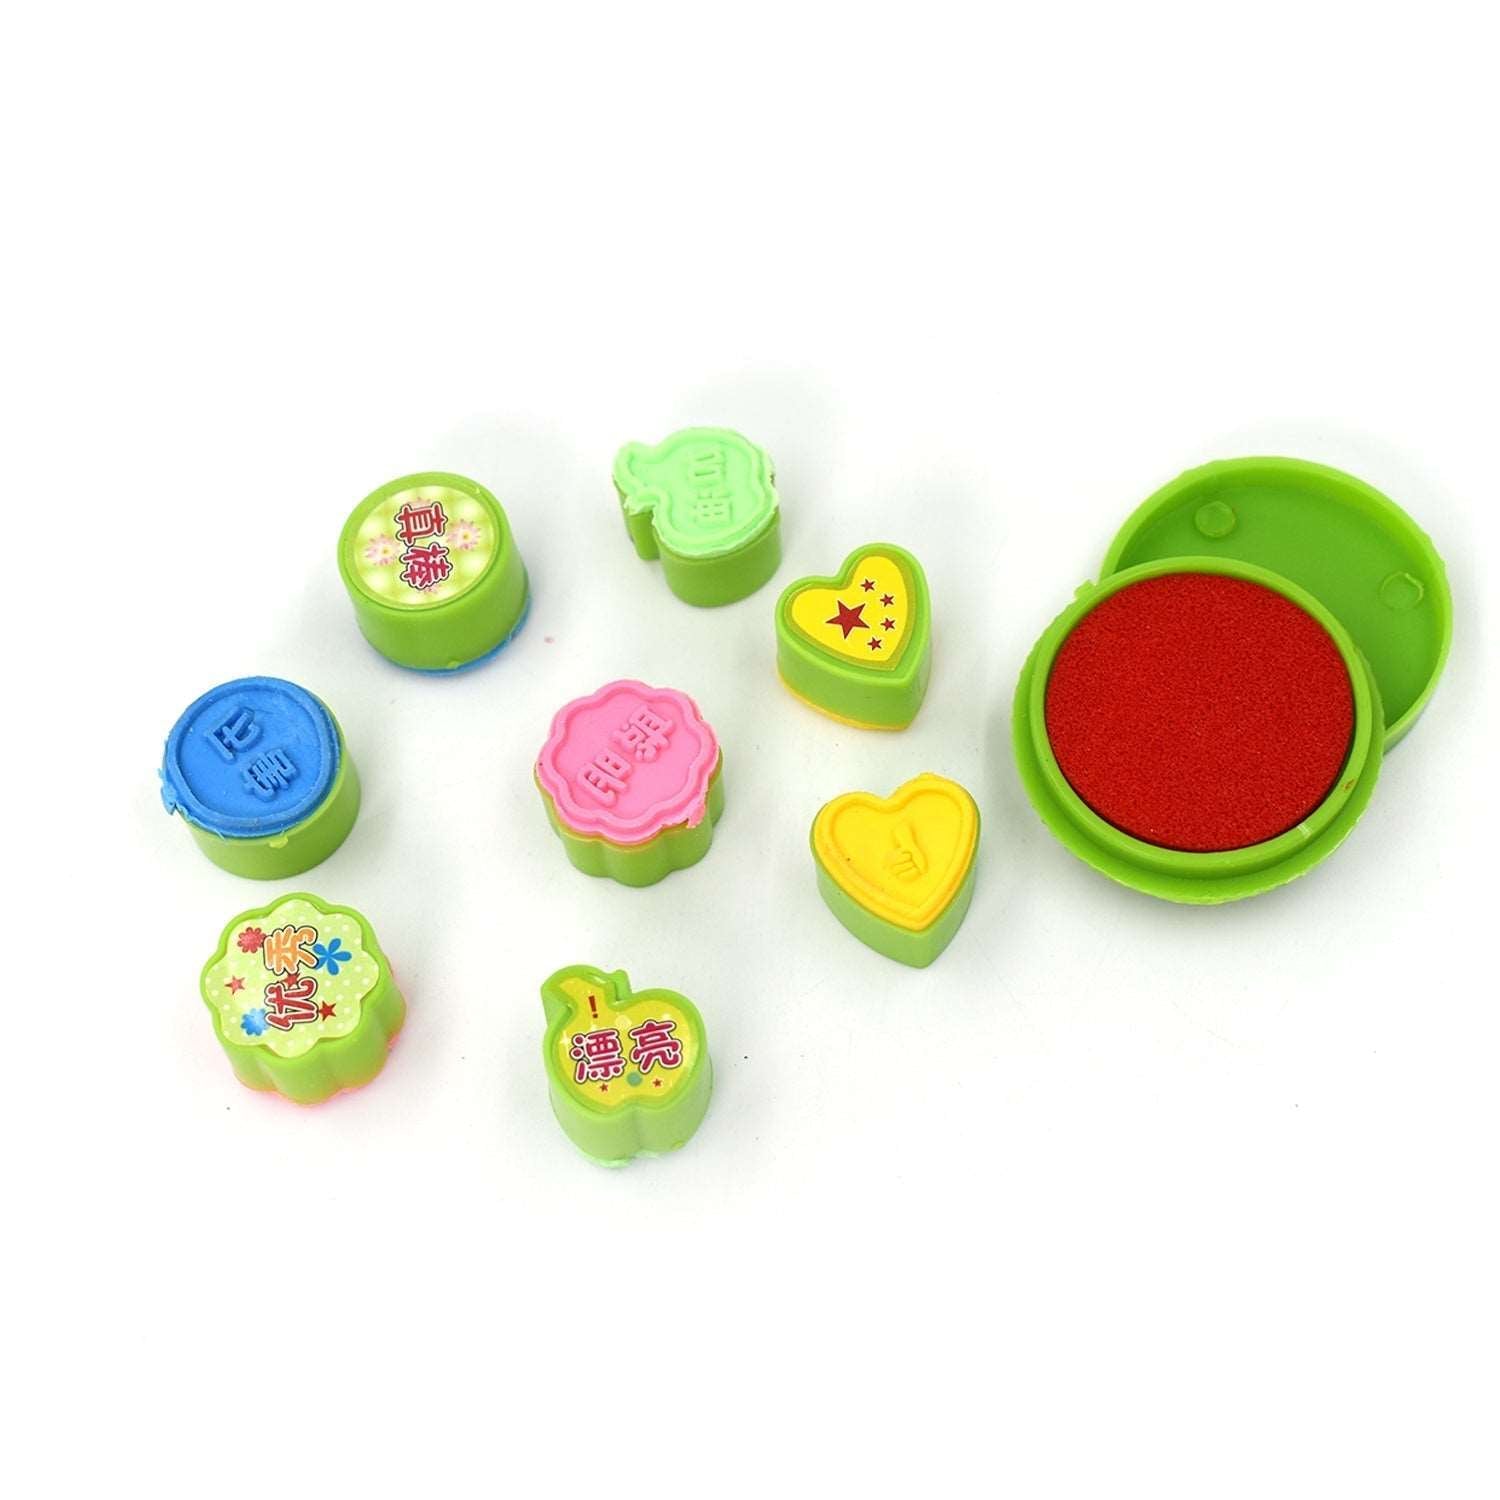 9 Pc Stamp Set used in all types of household places by kids and childrens for playing purposes.